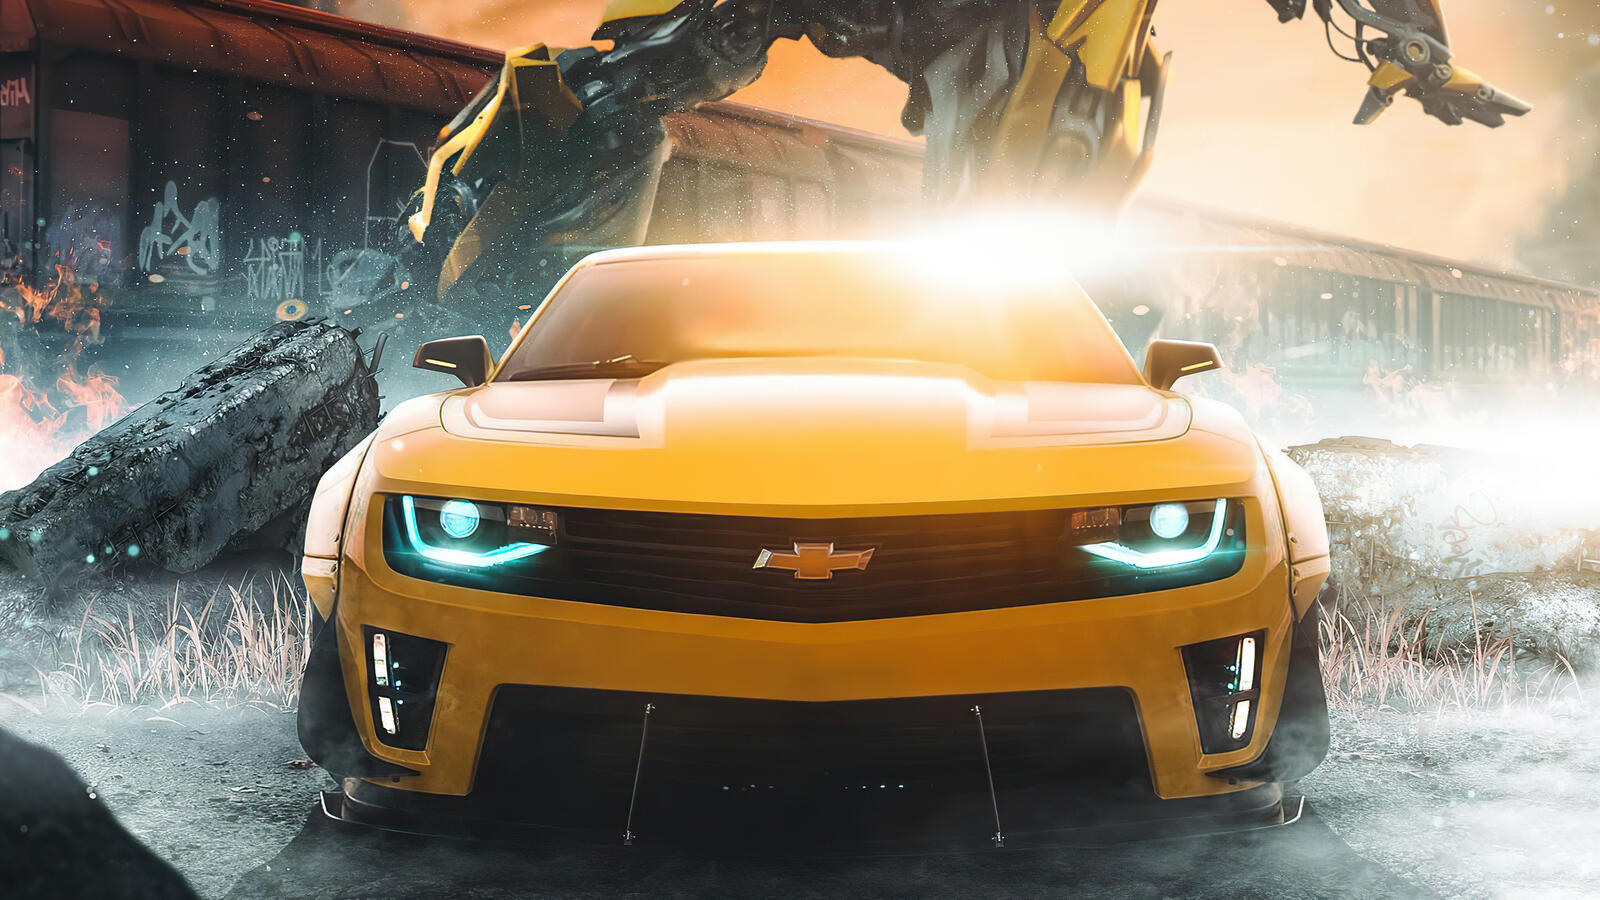 Free photo Bumblebee from the Transformers movie